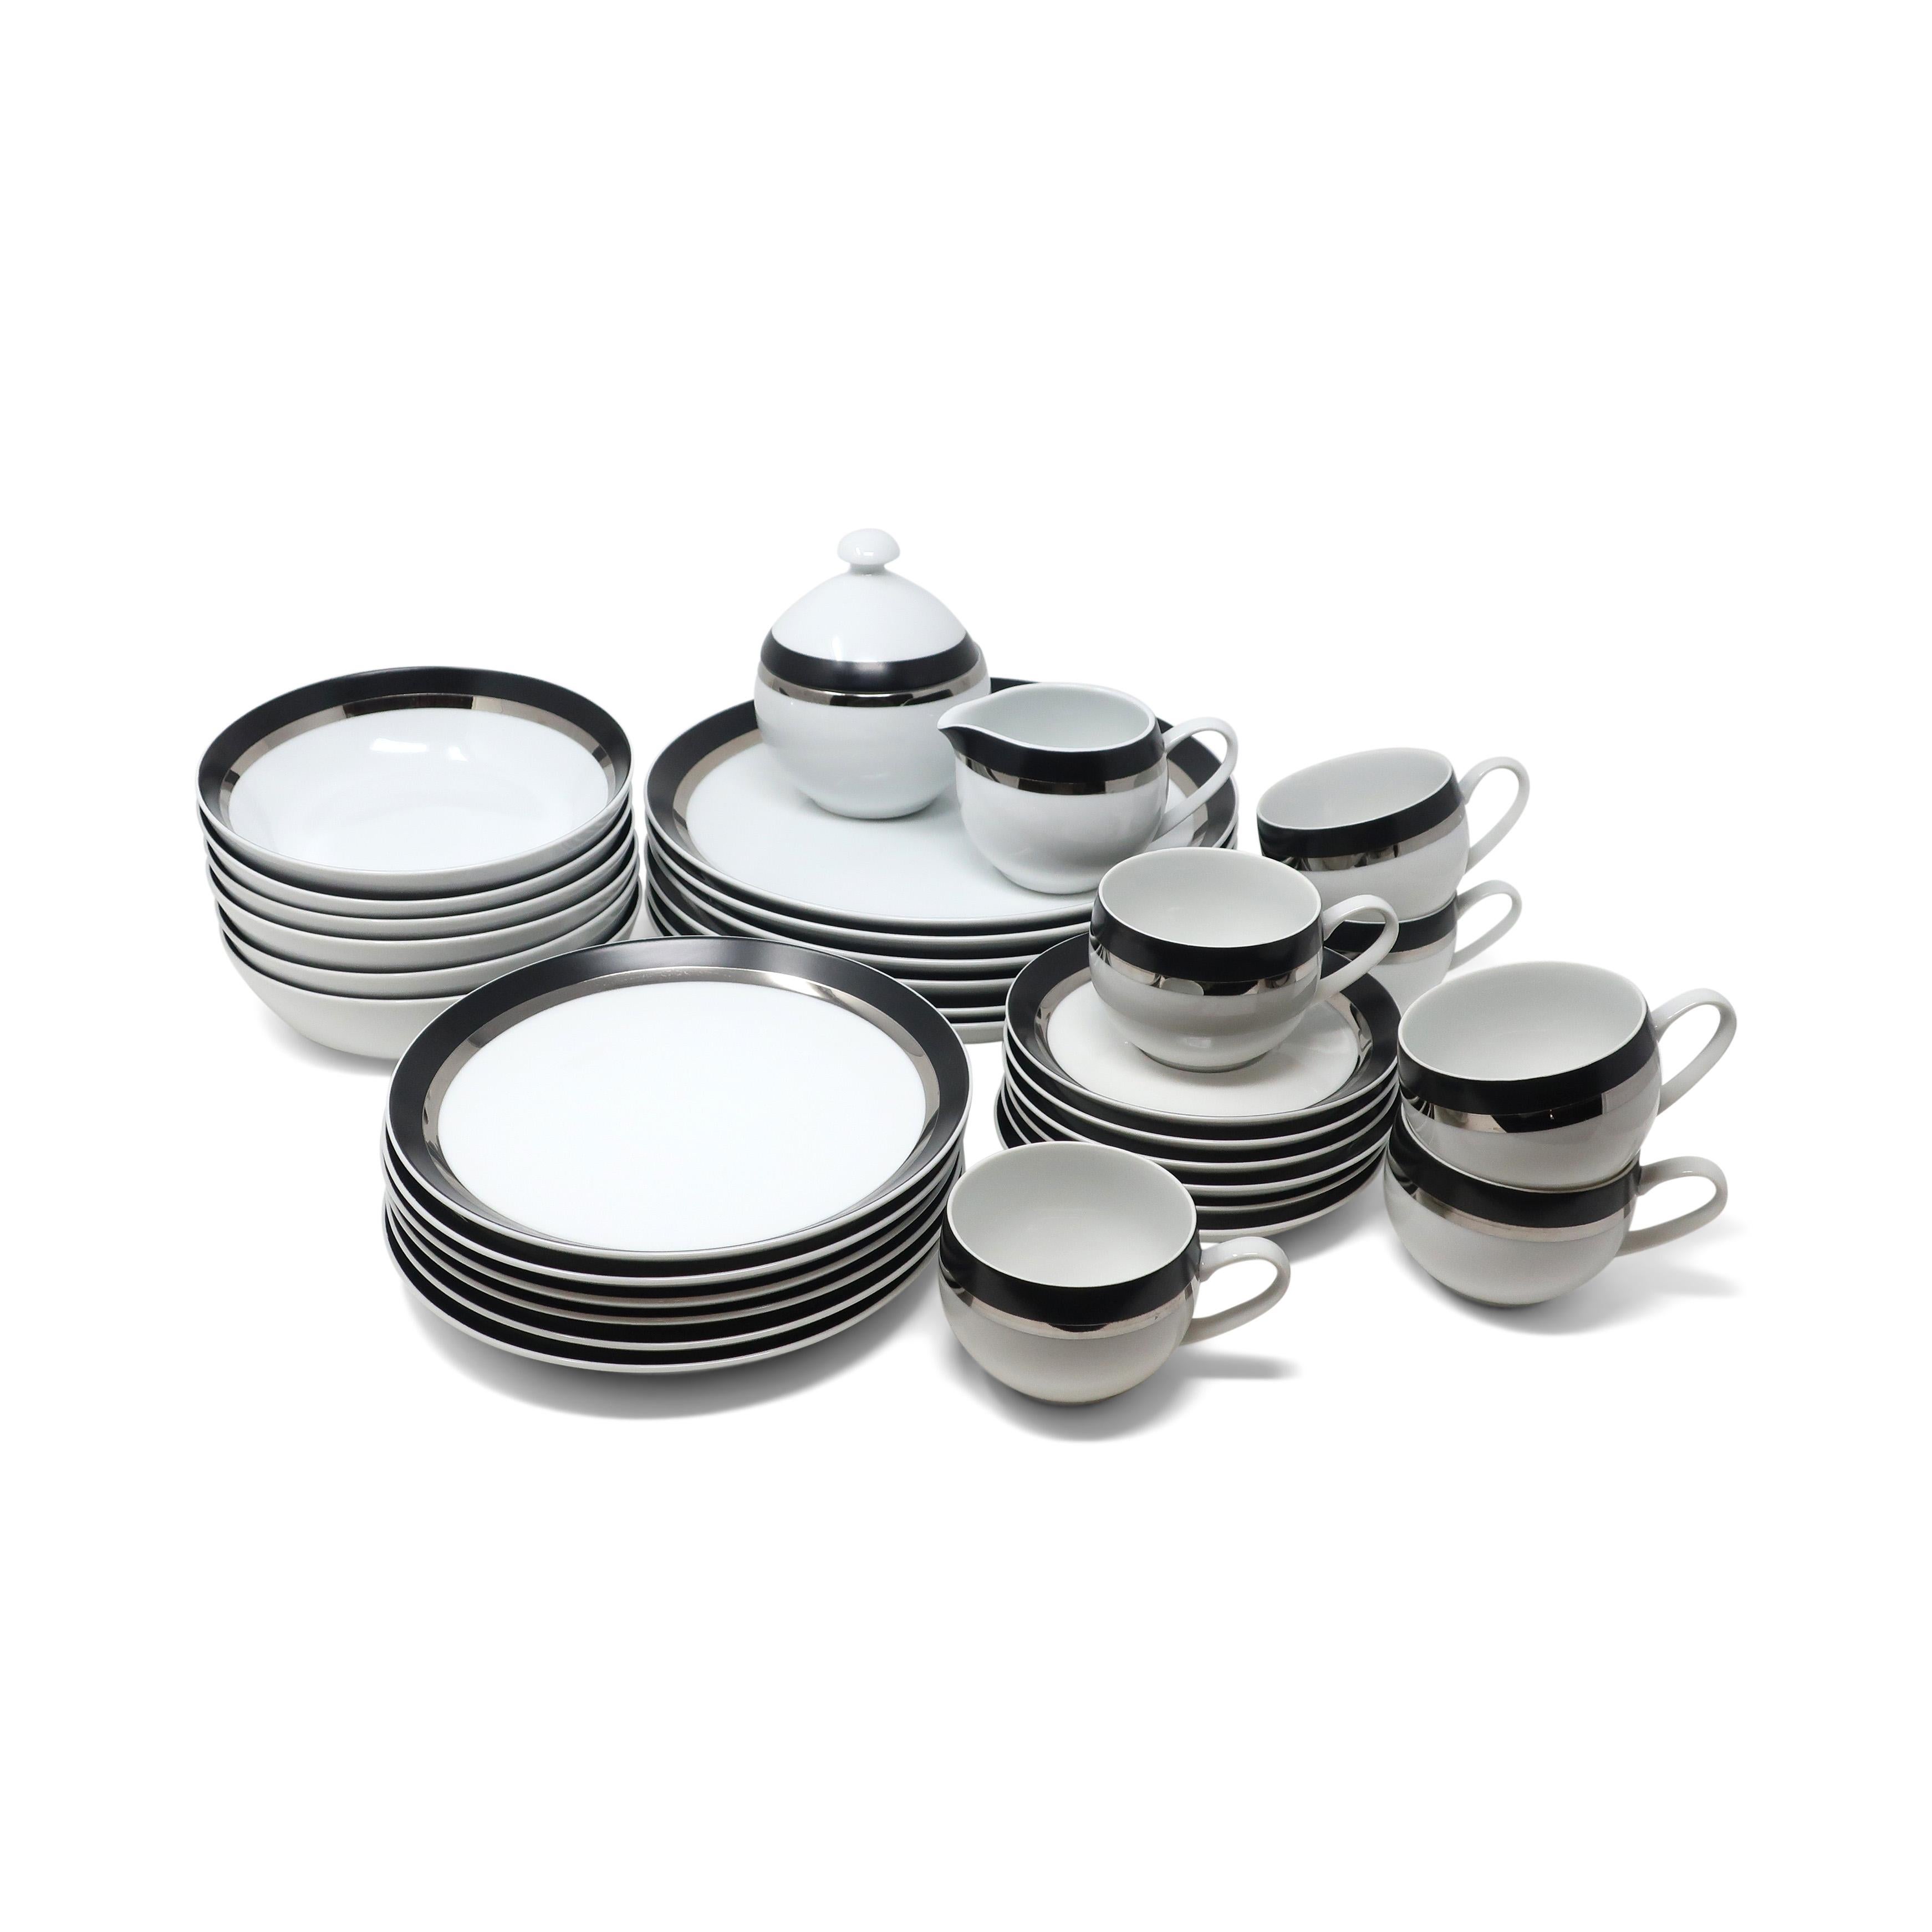 A beautiful set of vintage Ben Seibel's Pivotal dinnerware for Mikasa in the Montina color way. Modern elegance with a clean white glaze and striking black and silver stripes that are great for every day or saving for special occasions. Includes six